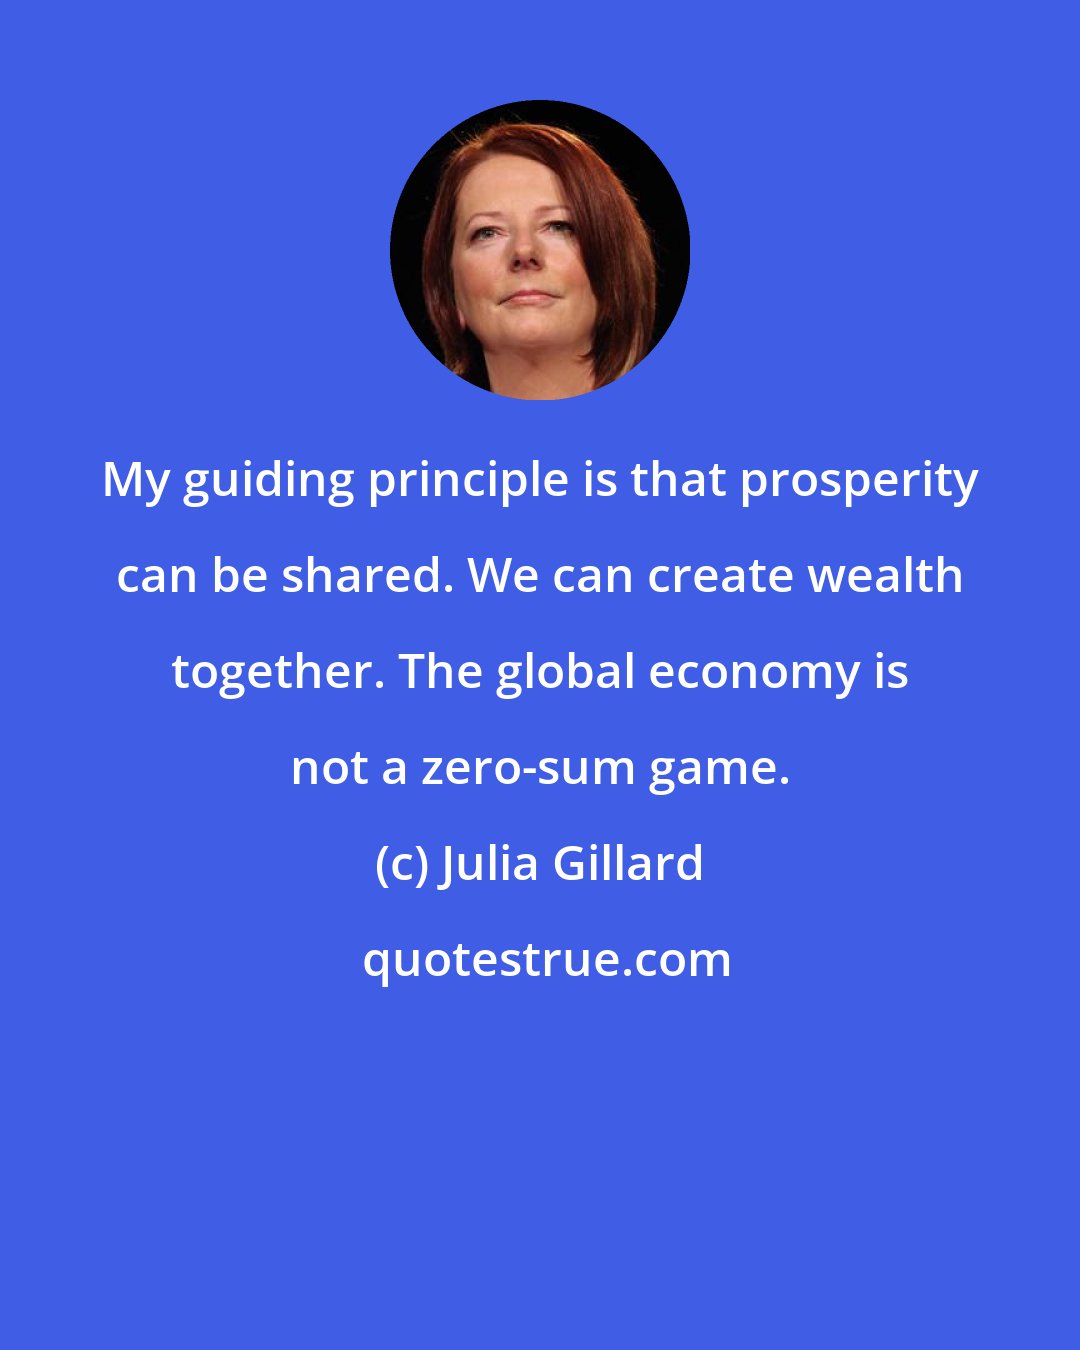 Julia Gillard: My guiding principle is that prosperity can be shared. We can create wealth together. The global economy is not a zero-sum game.